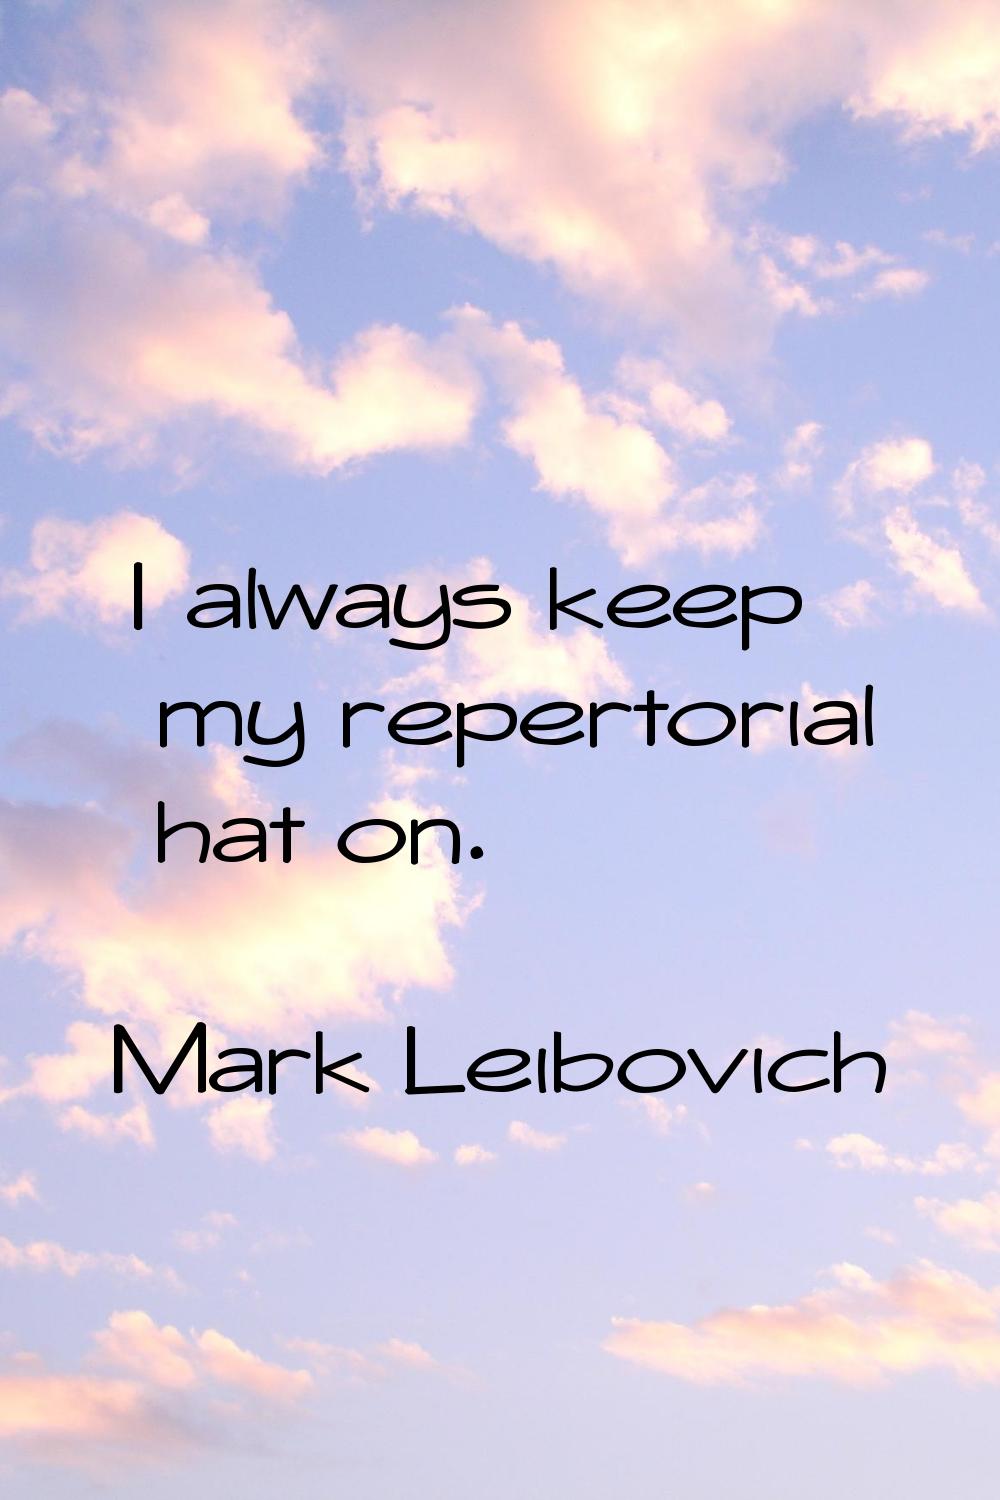 I always keep my repertorial hat on.